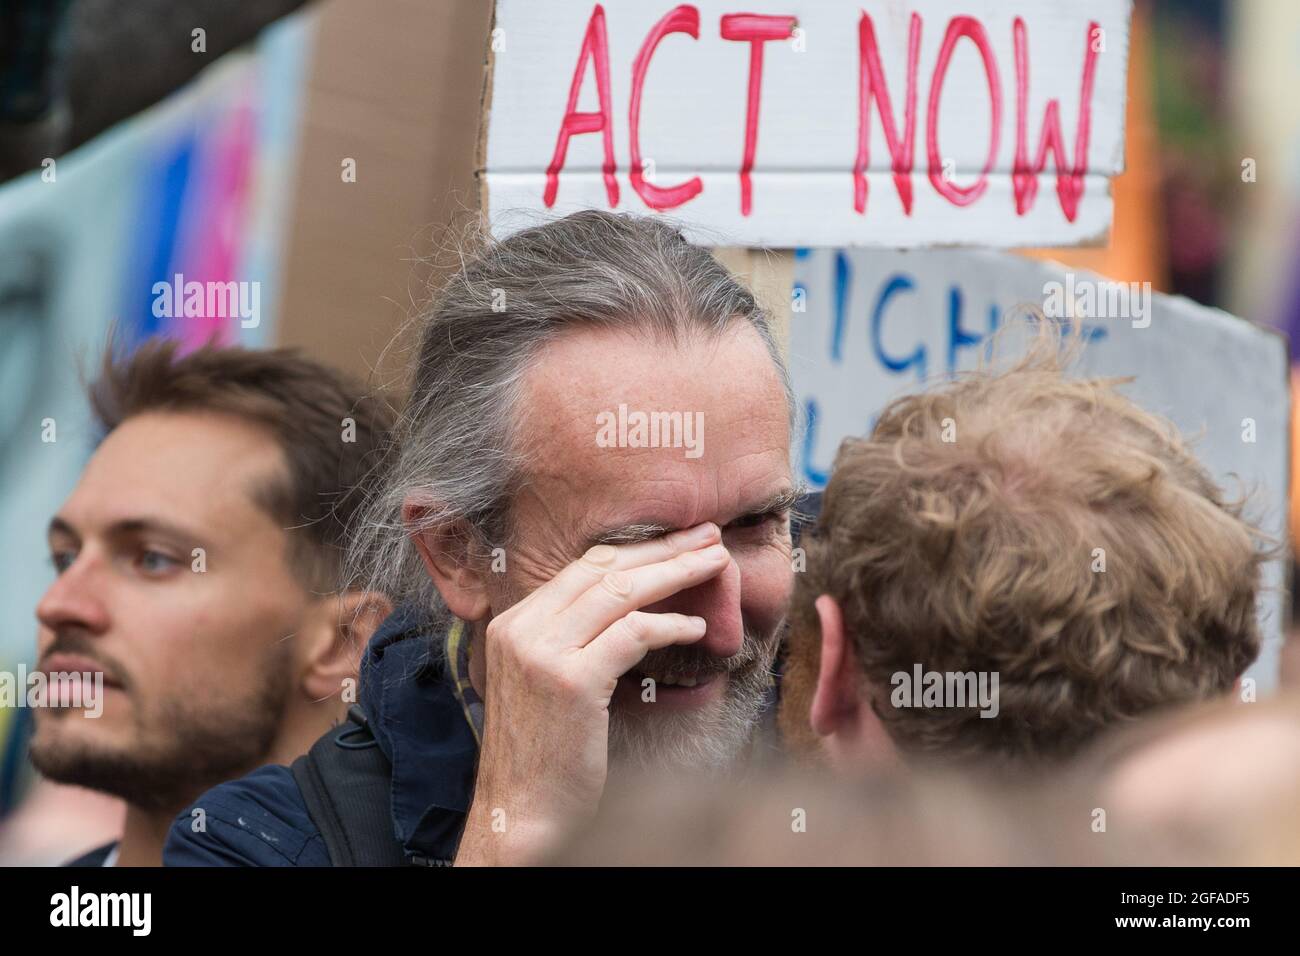 London, UK. 23rd August, 2021. Extinction Rebellion co-founder Roger Hallam rubs his face after being accidentally poked in the eye with an Extinction Rebellion flag during the first day of Impossible Rebellion protests. Extinction Rebellion are calling on the UK government to cease all new fossil fuel investment with immediate effect. Credit: Mark Kerrison/Alamy Live News Stock Photo